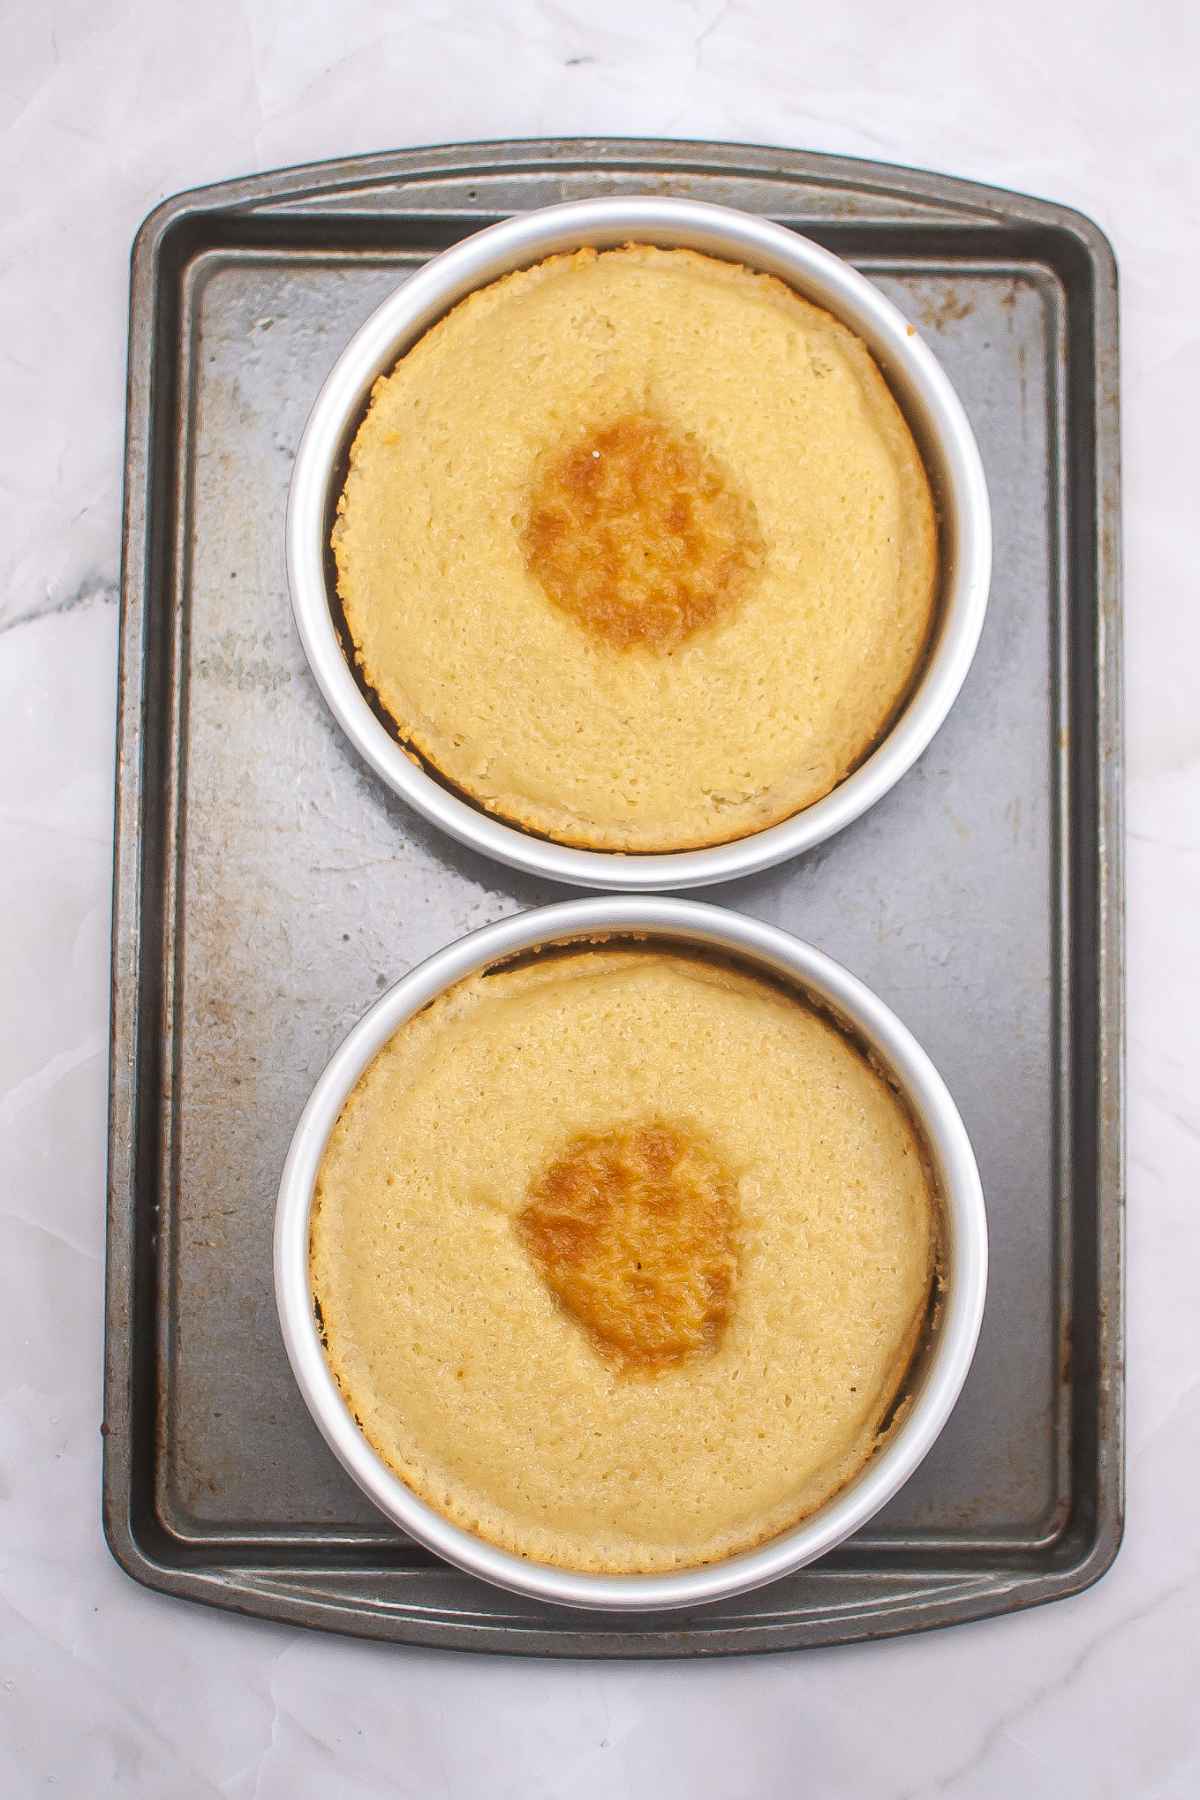 Two baked cakes on a baking sheet.